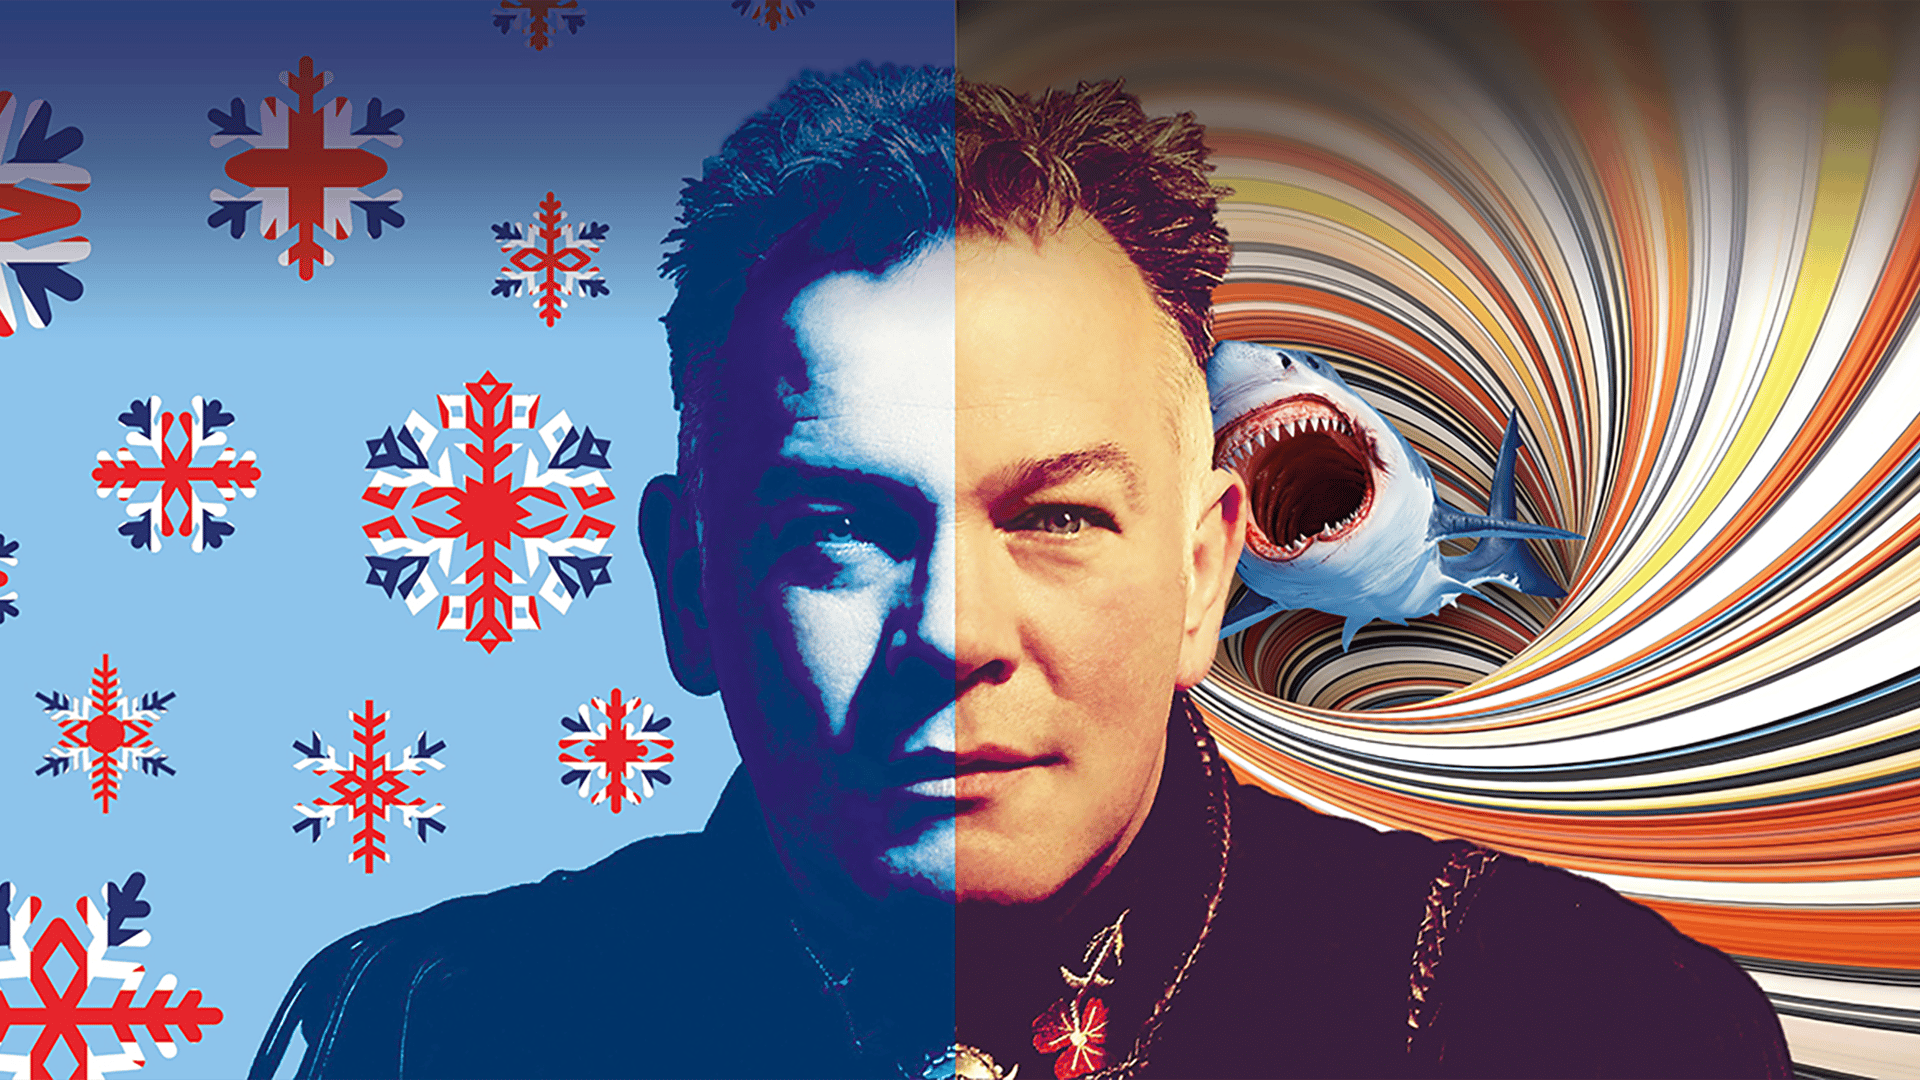 Stewart Lee promotional image: The man himself in the centre, the left side coloured blue, with British flag patterned snowflakes, the right in orange and yellow tones, behind him a tornado swirl with a shark jumping out of the centre